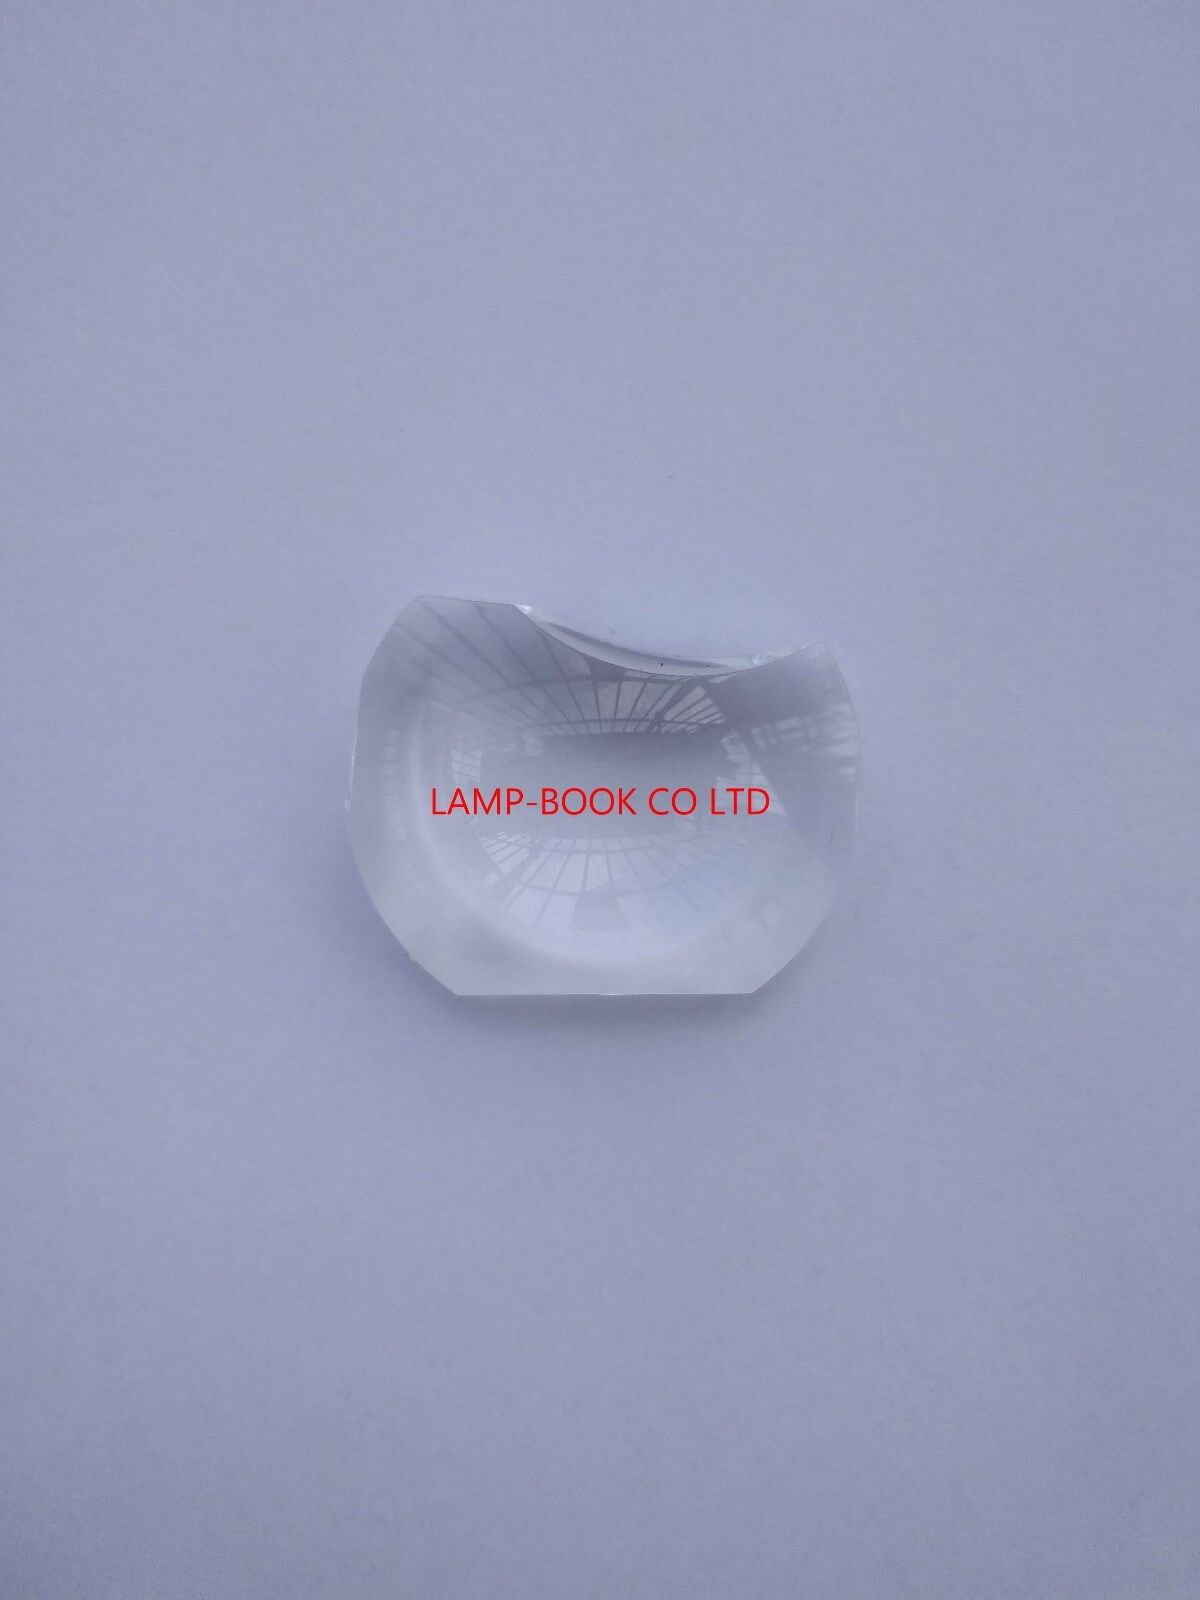 COMPATIBLE CONDENSOR RESIN LENS FOR BENQ W700 PROJECTOR